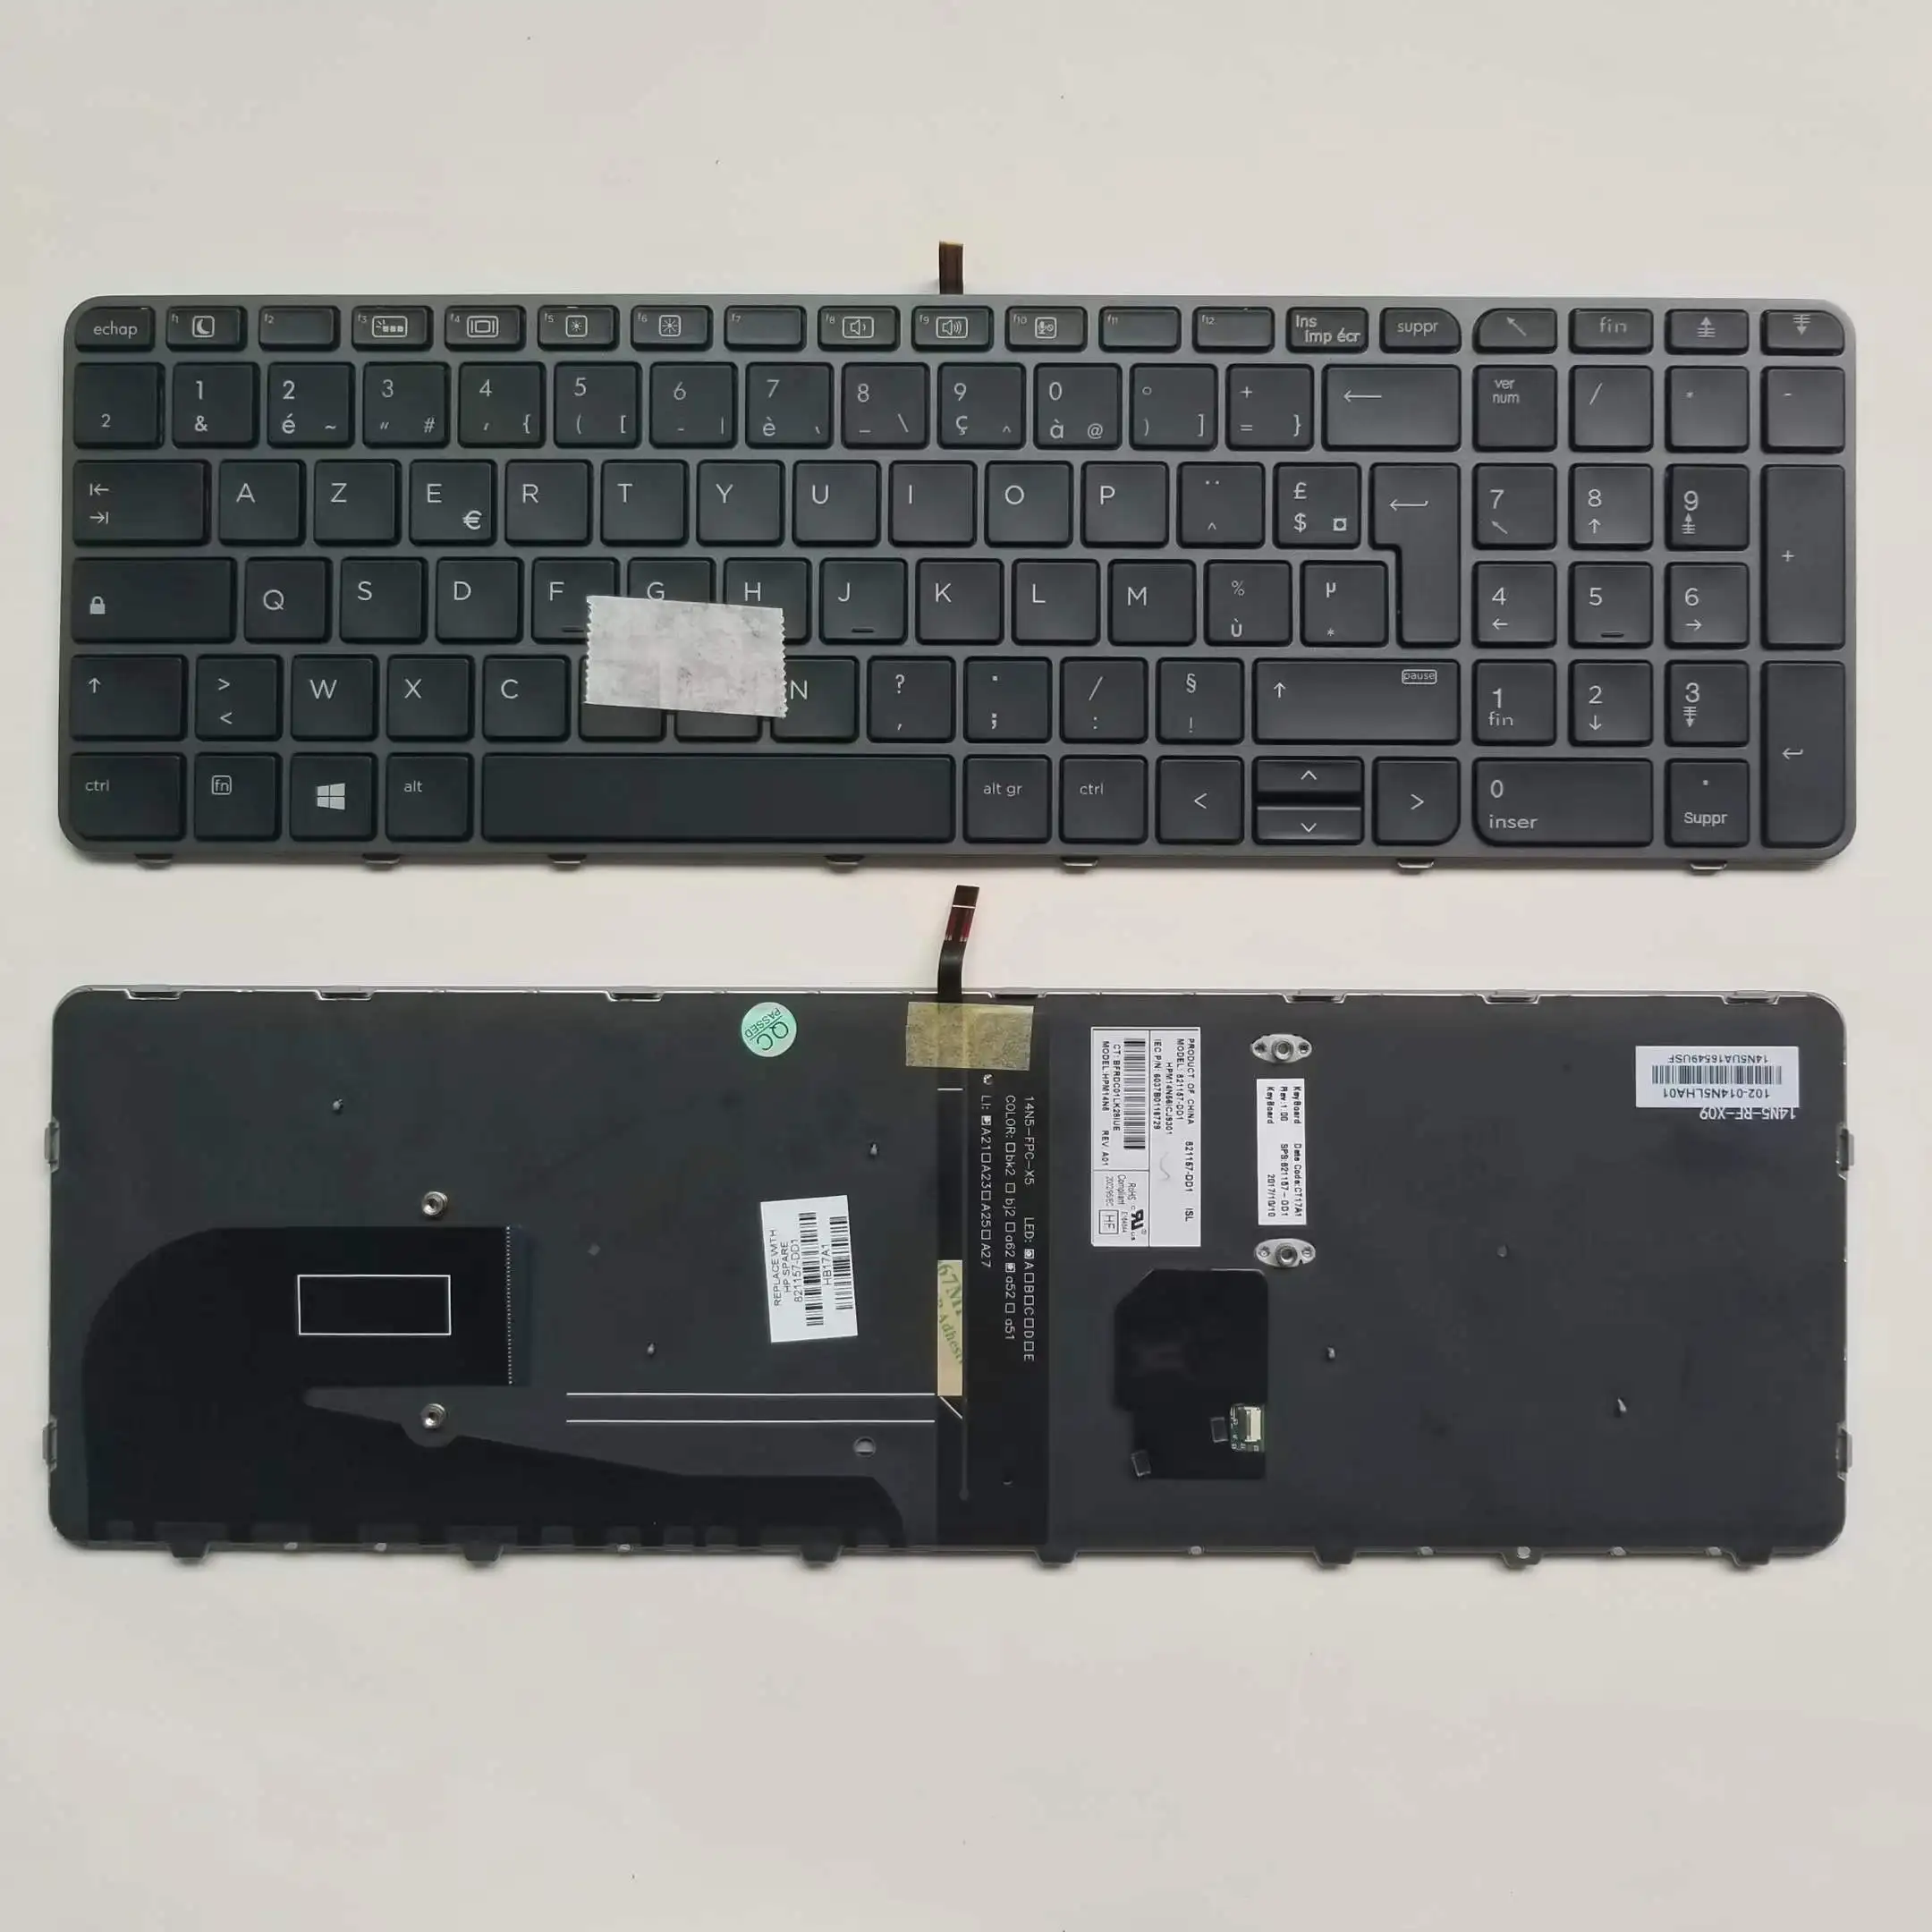 

New FR French Keyboard For HP EliteBook 755 G3 755 G4 850 G3 850 G4 With Point Brown Frame Backlit